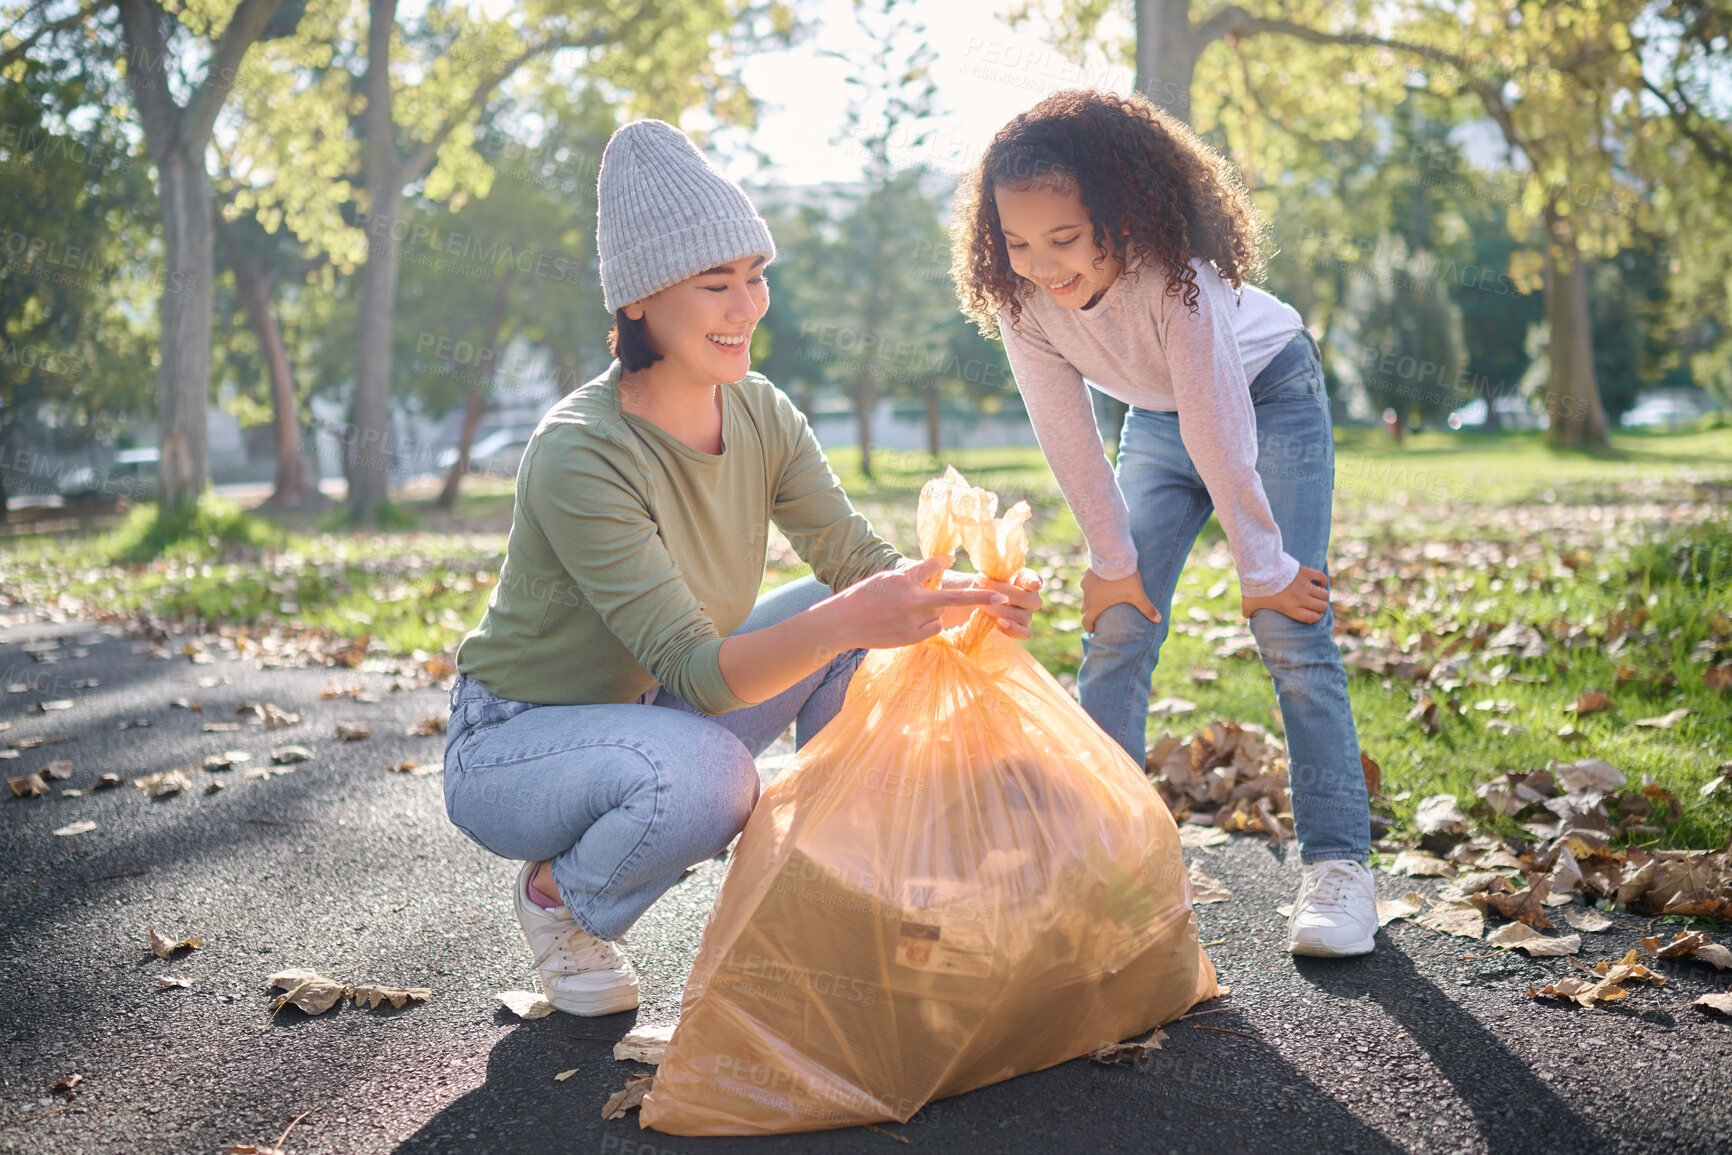 Buy stock photo Trash, volunteer woman and kid cleaning garbage, pollution or waste product for environment community service. Plastic bag container, NGO charity and eco friendly child help with nature park clean up